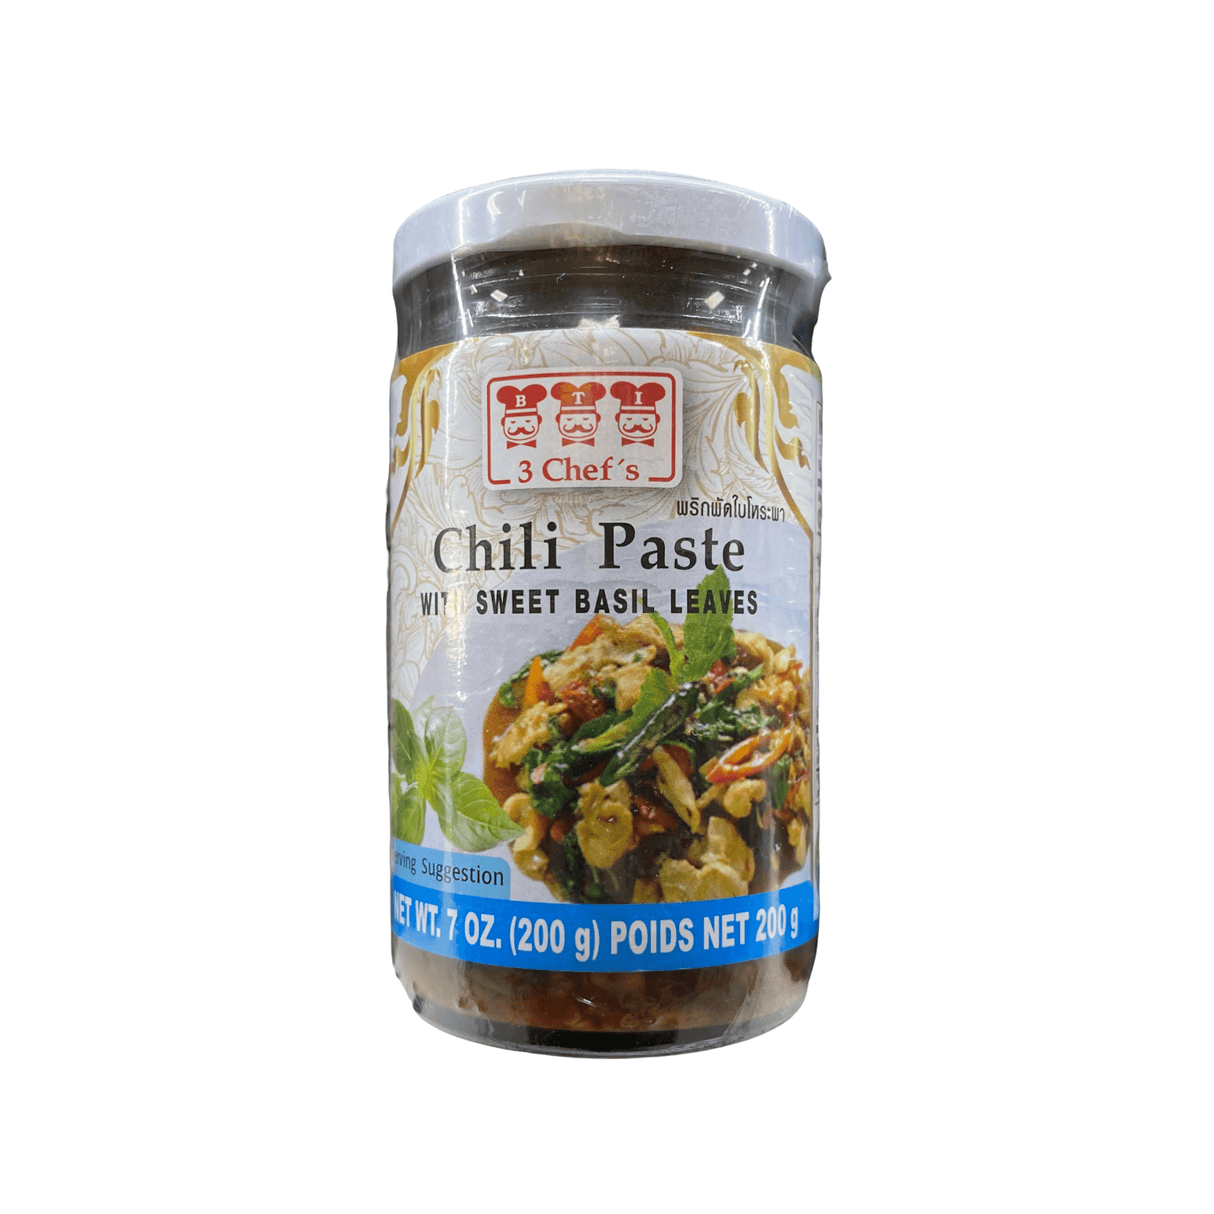 3 Chef's Chili Paste with Sweet Basil Leaves